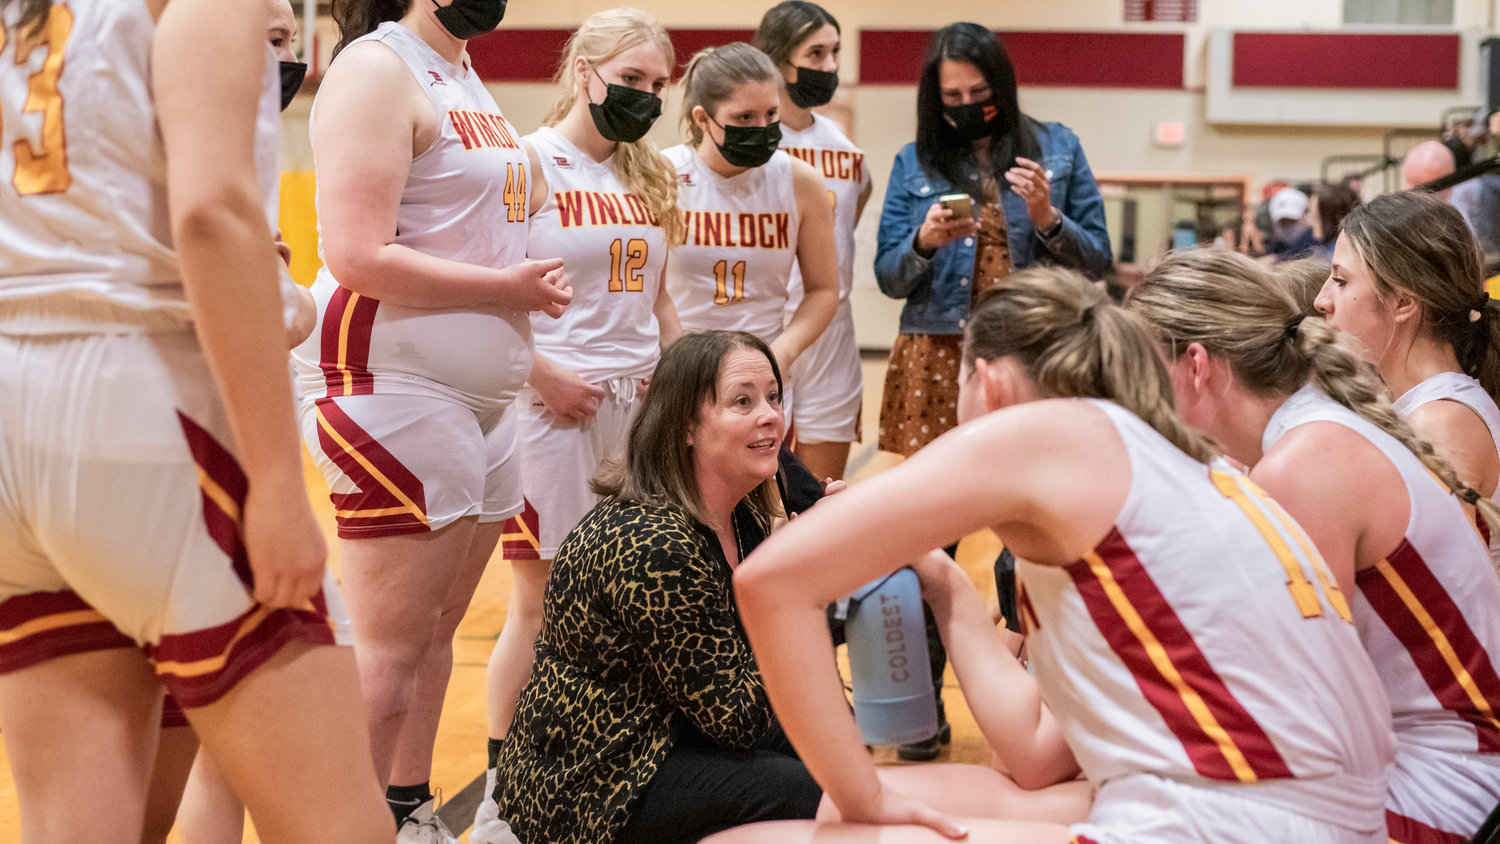 Winlock Head Coach Dracy McCoy talks to athletes courtside in Winlock during a game against Rainier Wednesday night.